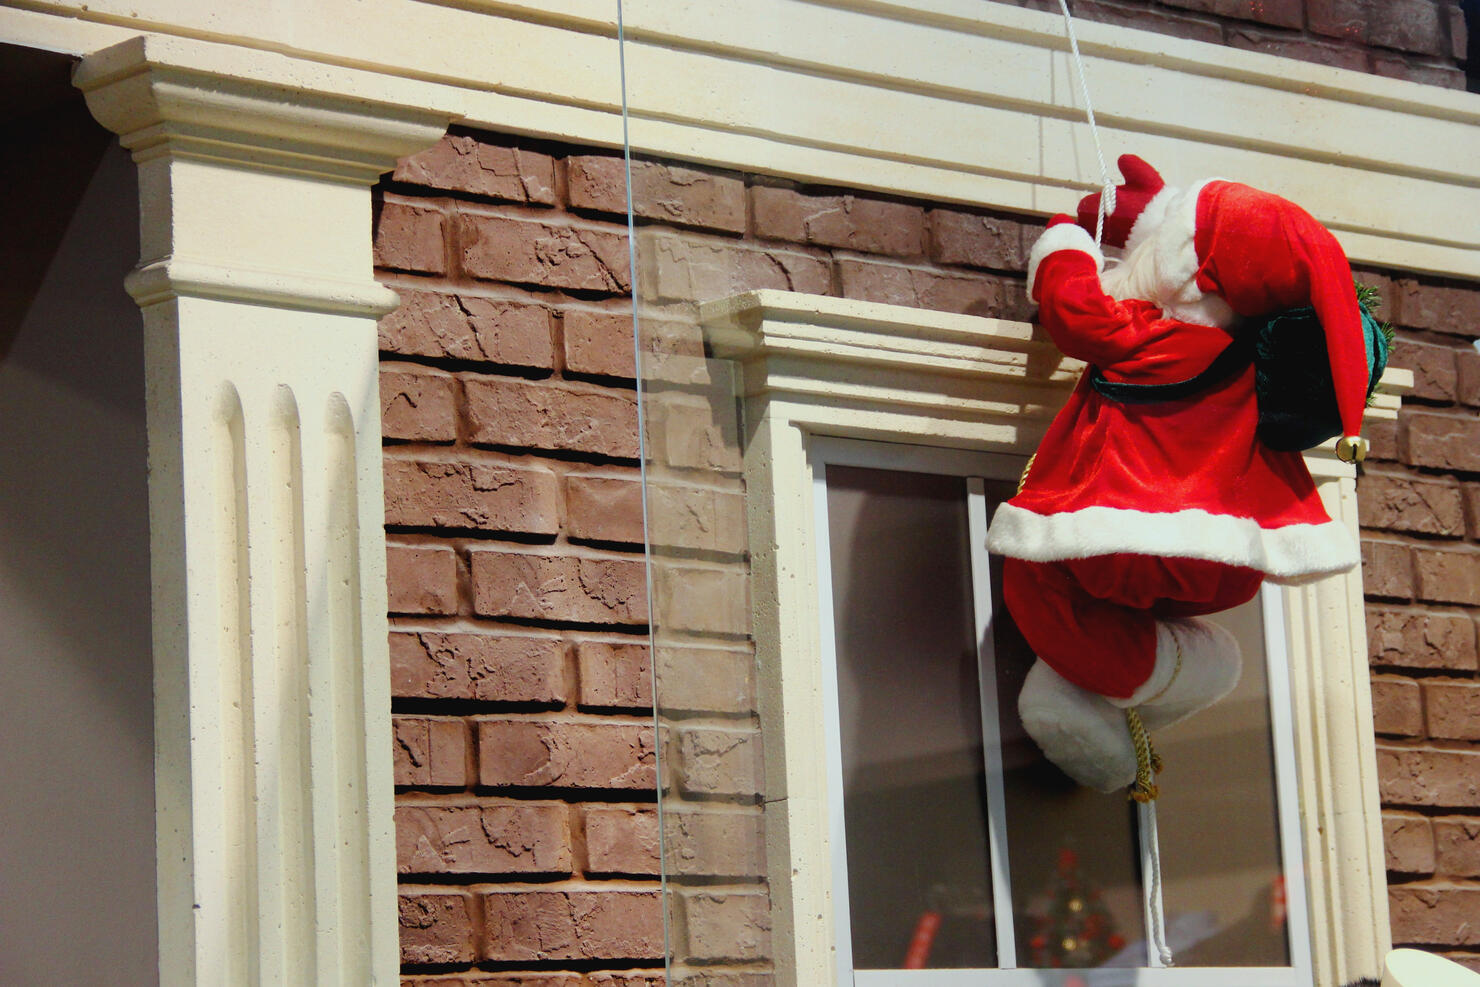 Santa Claus descends on a rope. Christmas decoration of the facade of the building